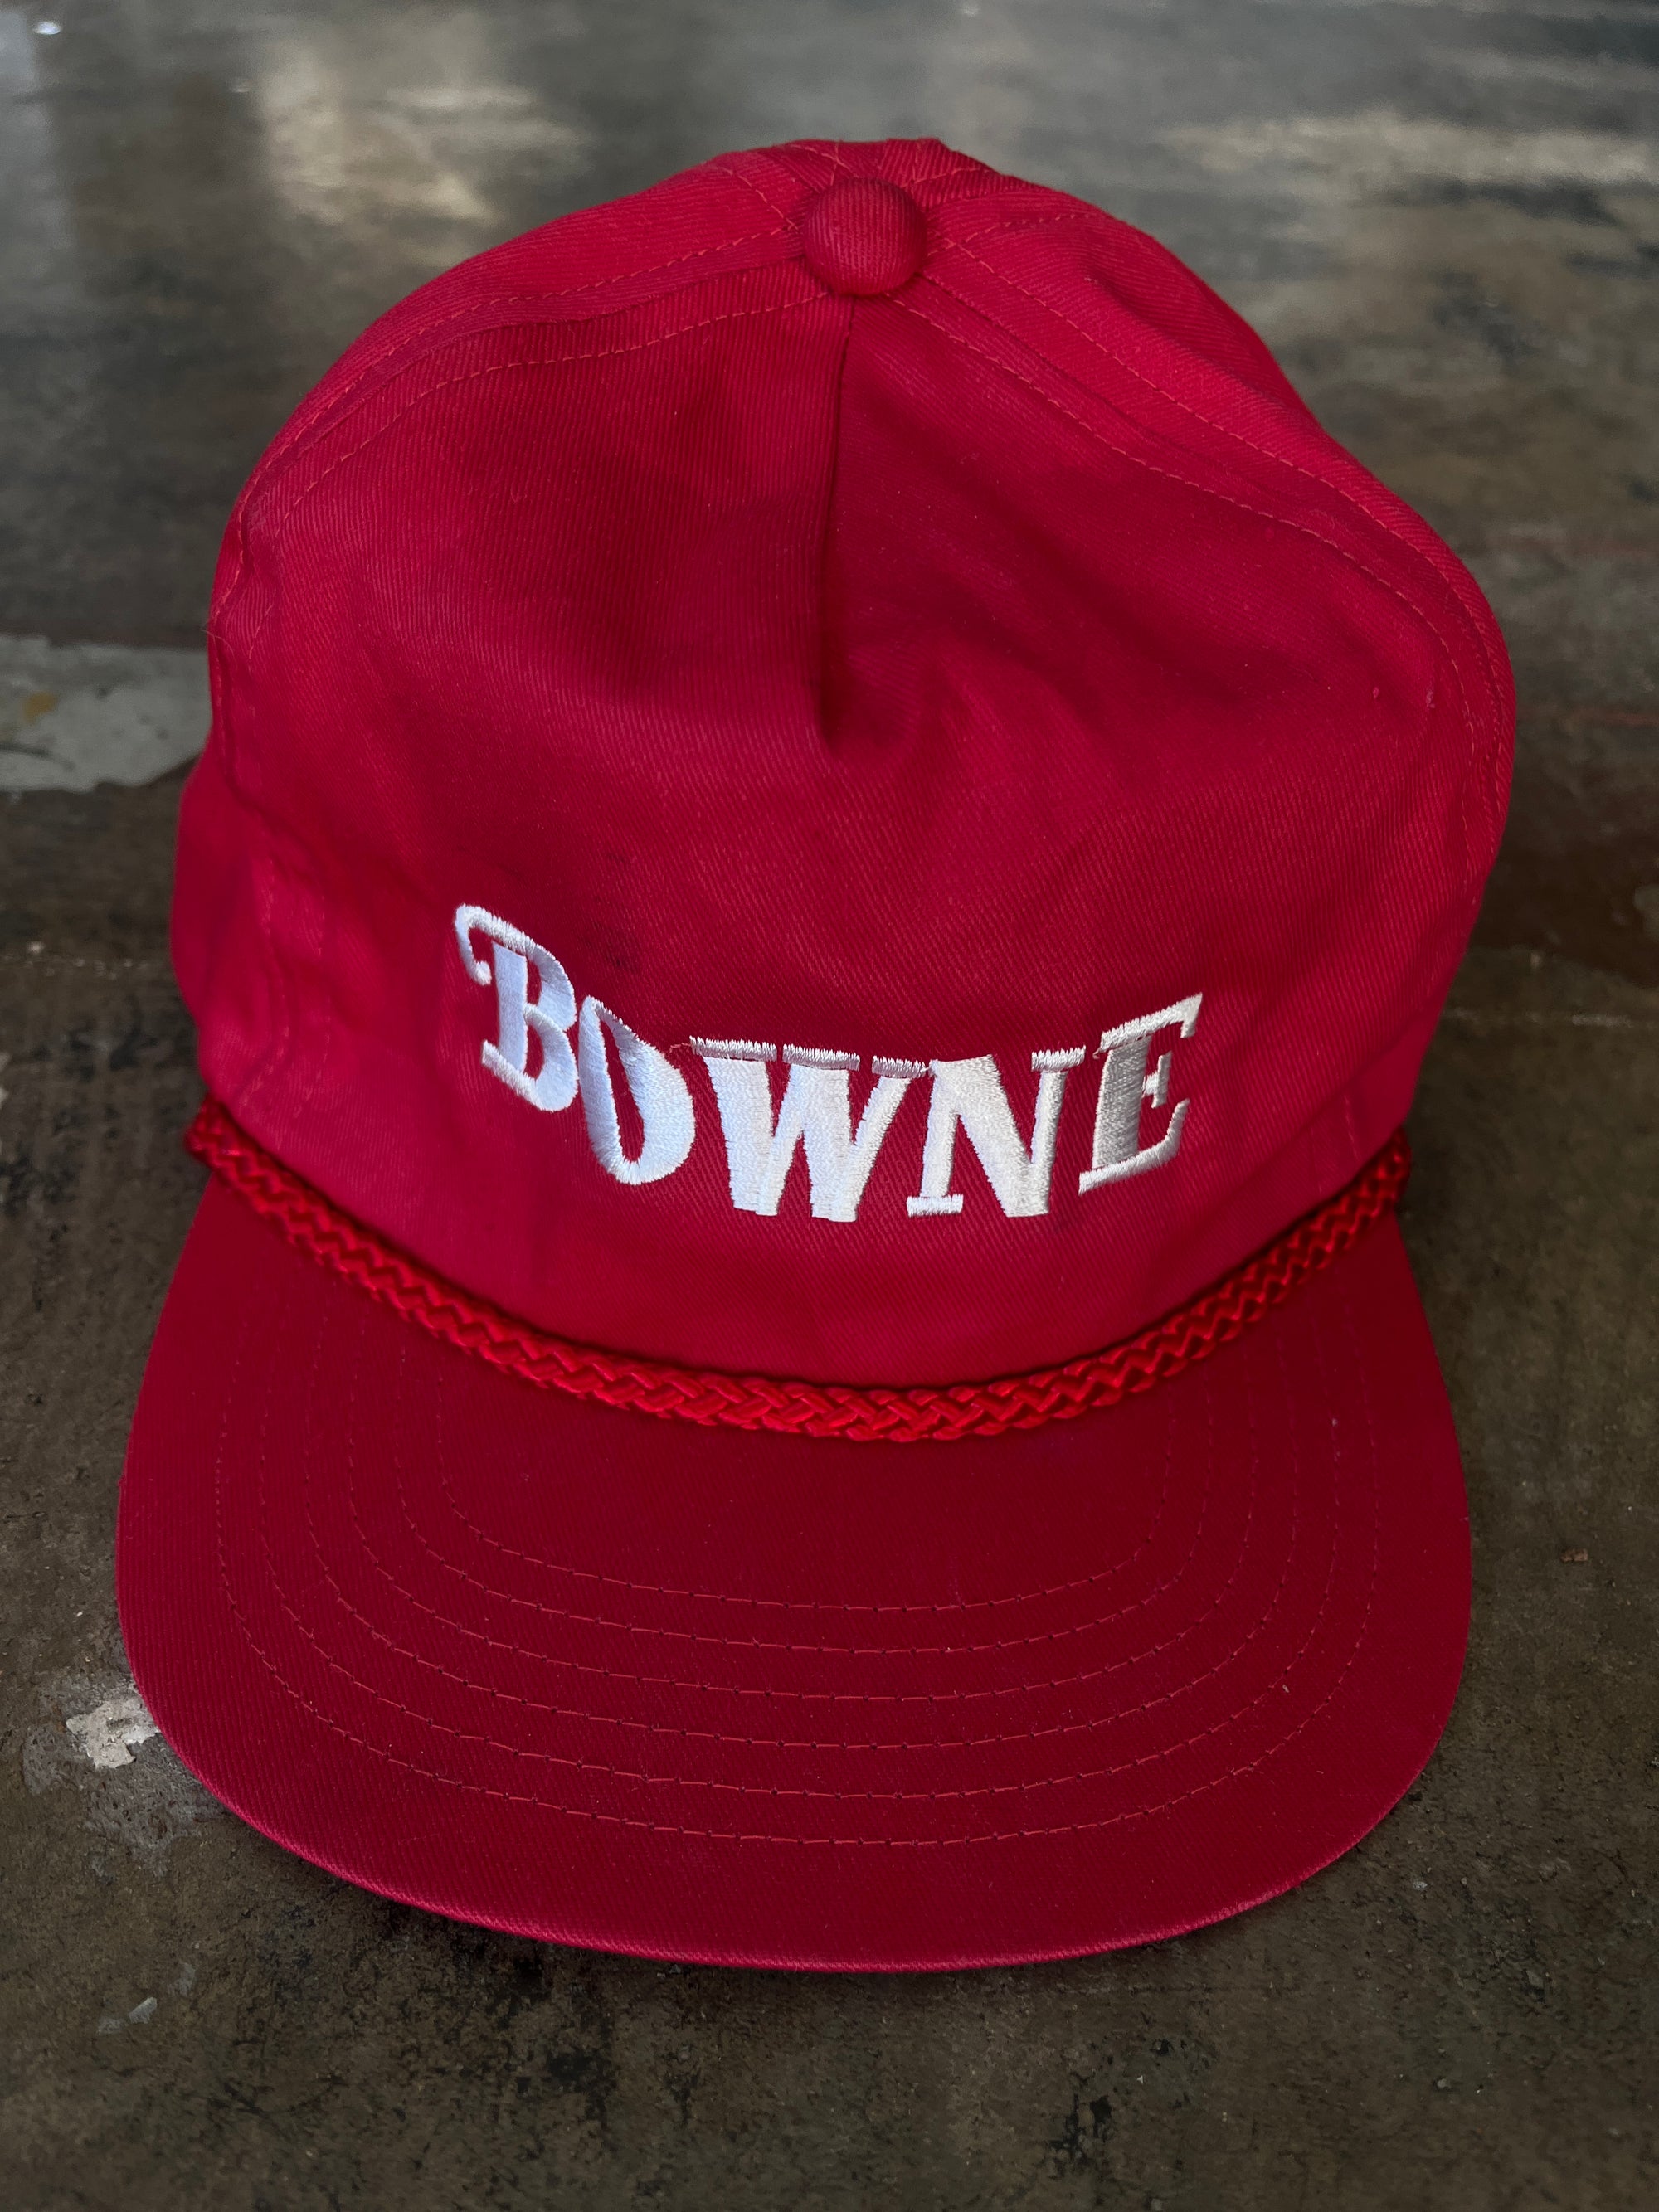 Dark Red Bowne Embroidered Hat